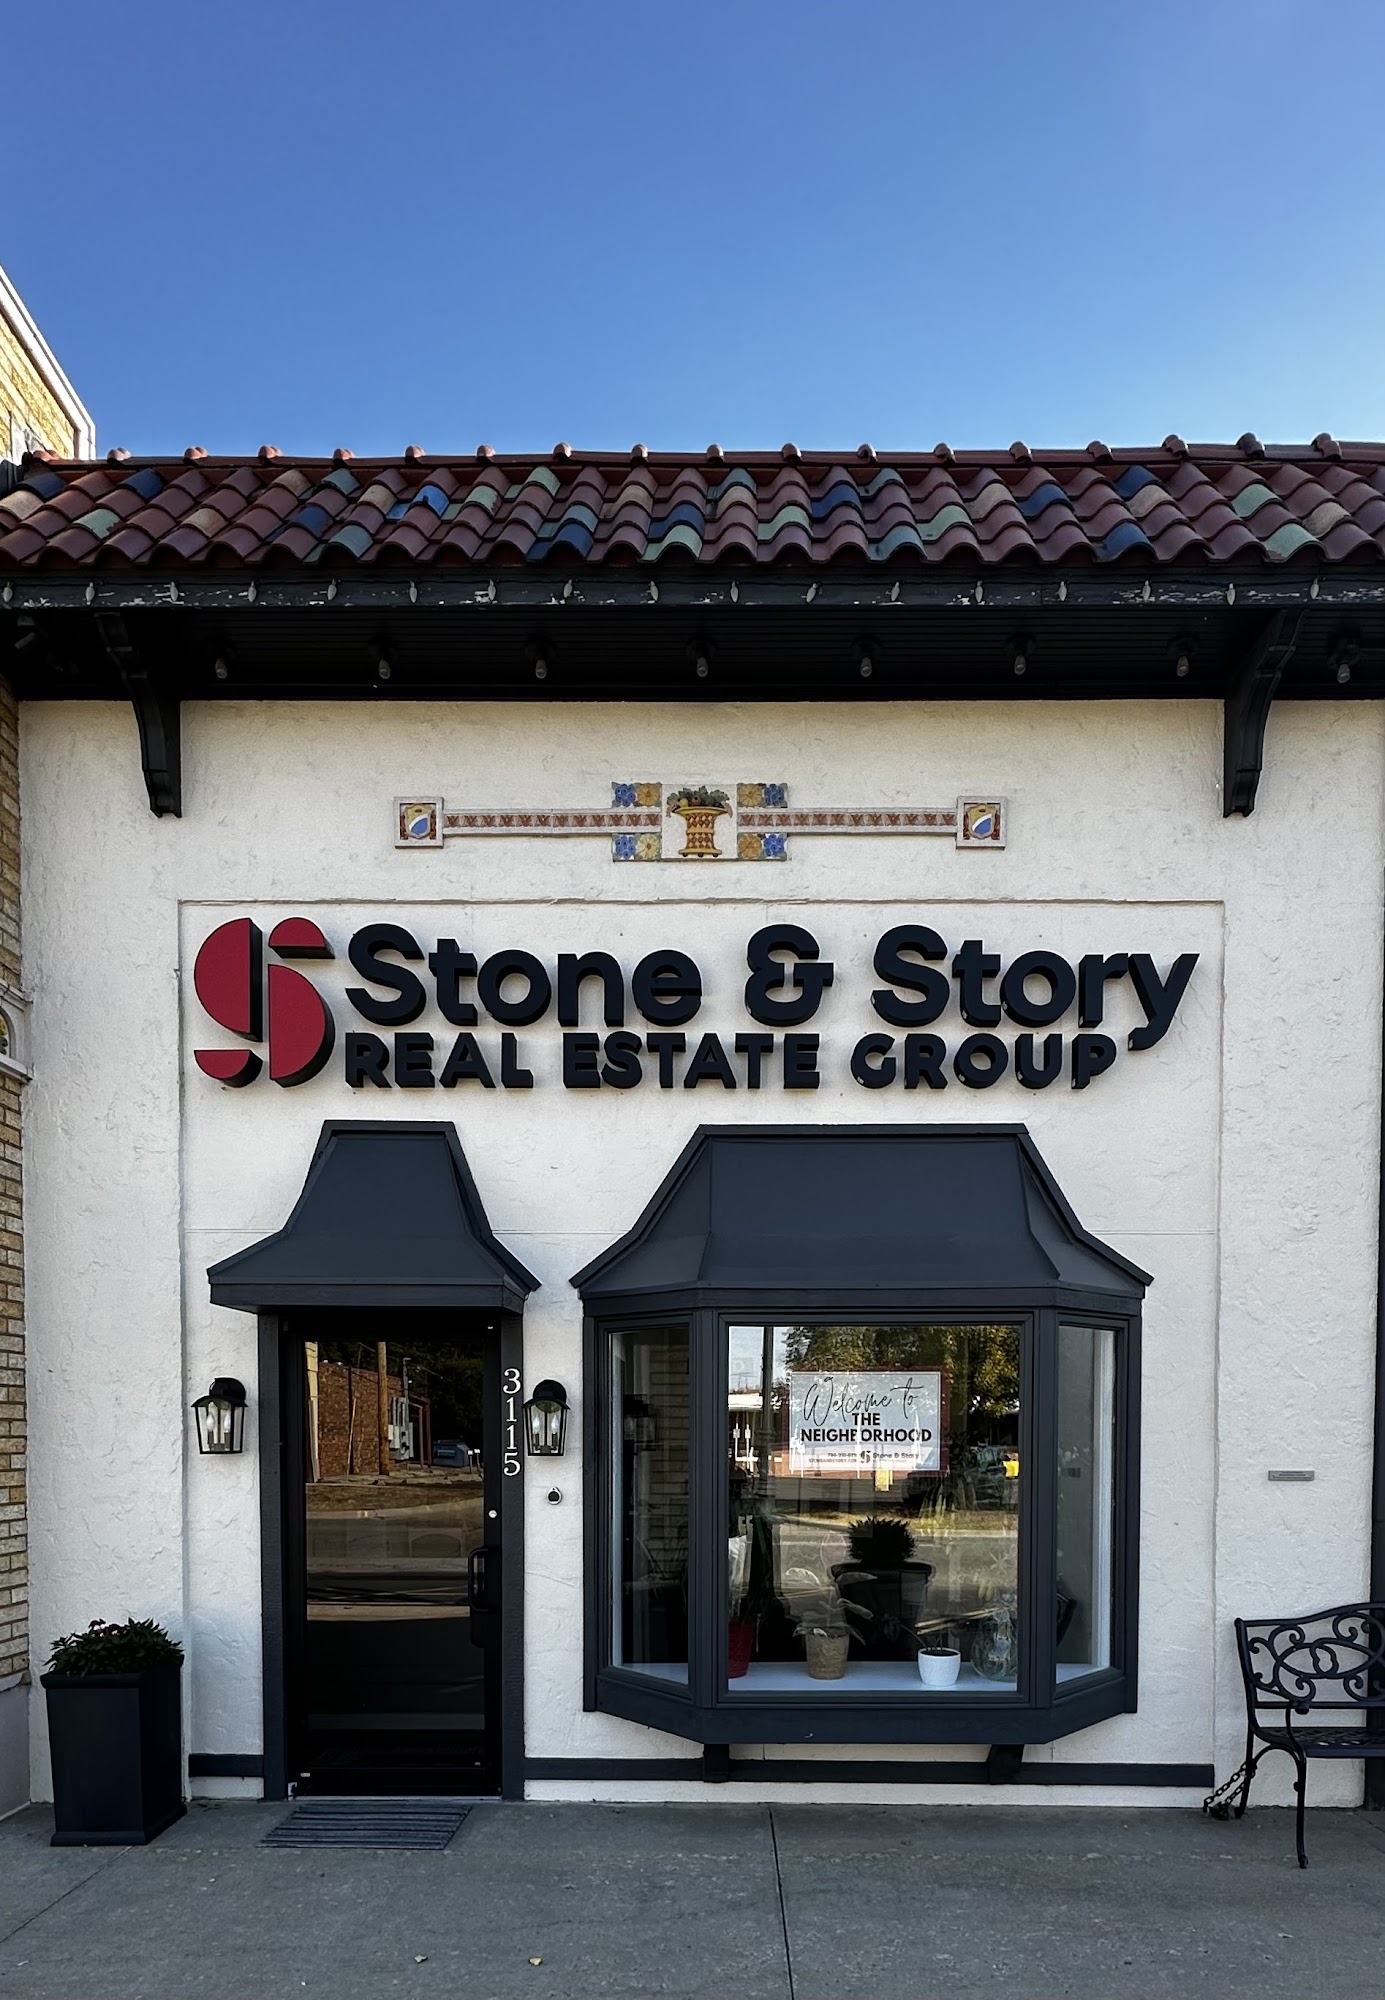 Stone & Story Real Estate Group